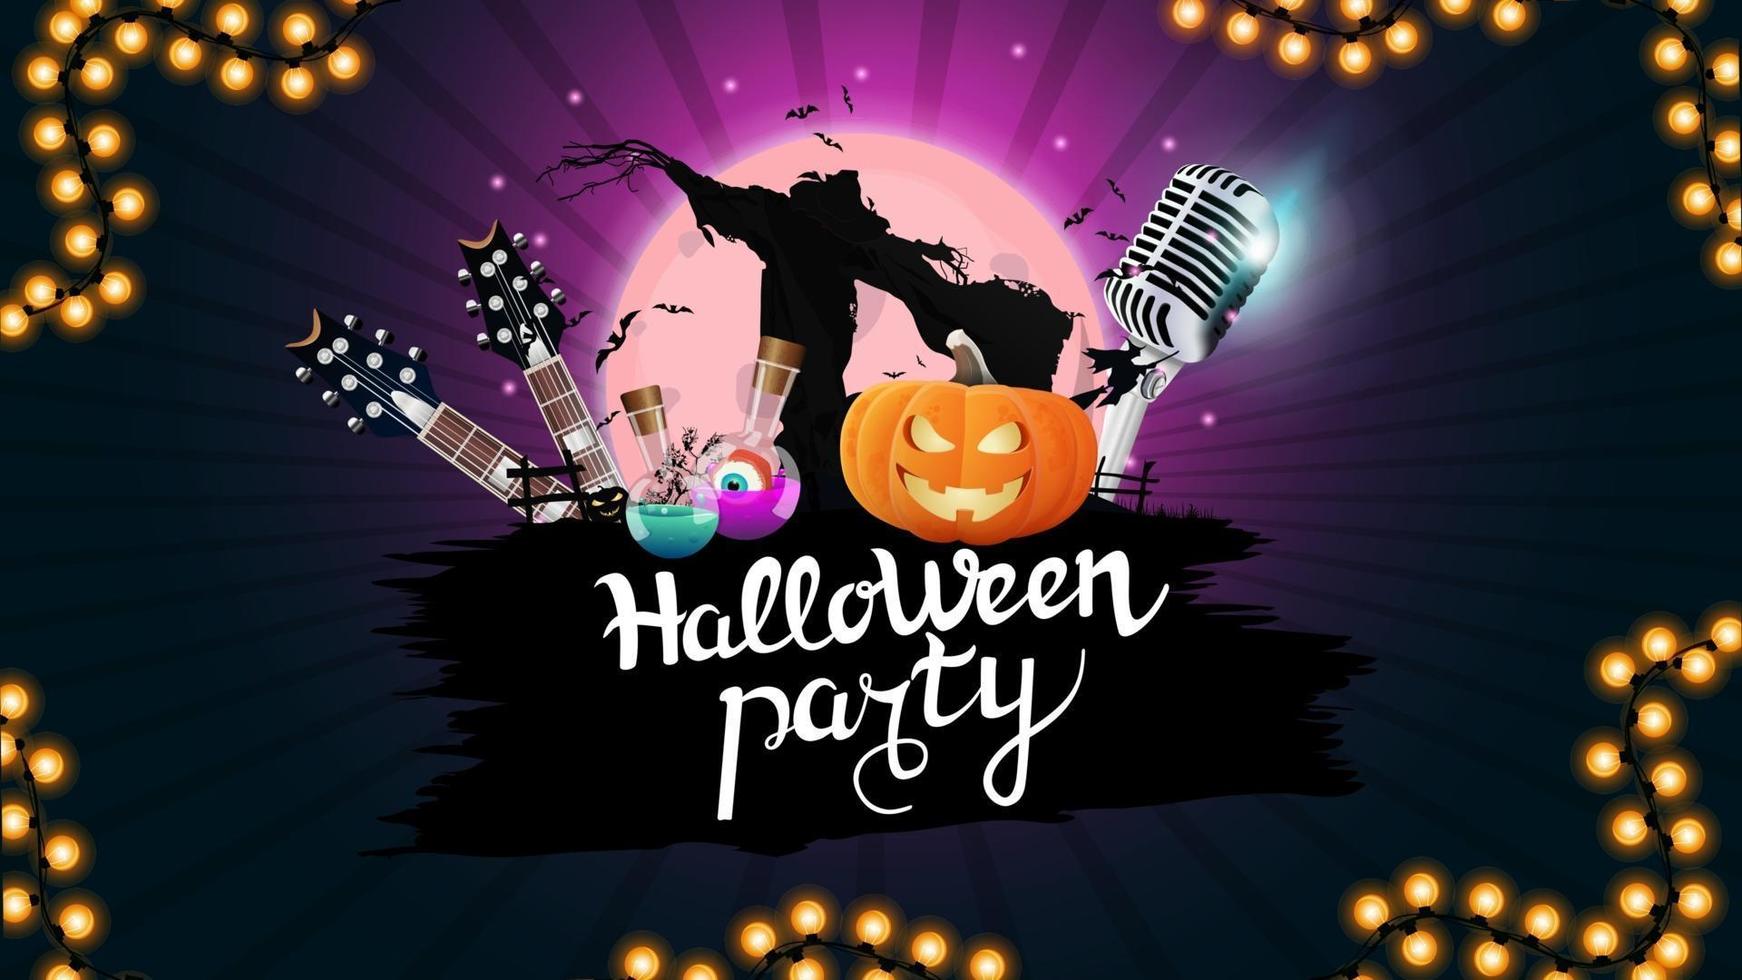 Halloween party, creative party invitation banner with microphone, guitars, pumpkins and Scarecrow. Purple template for Halloween party poster vector